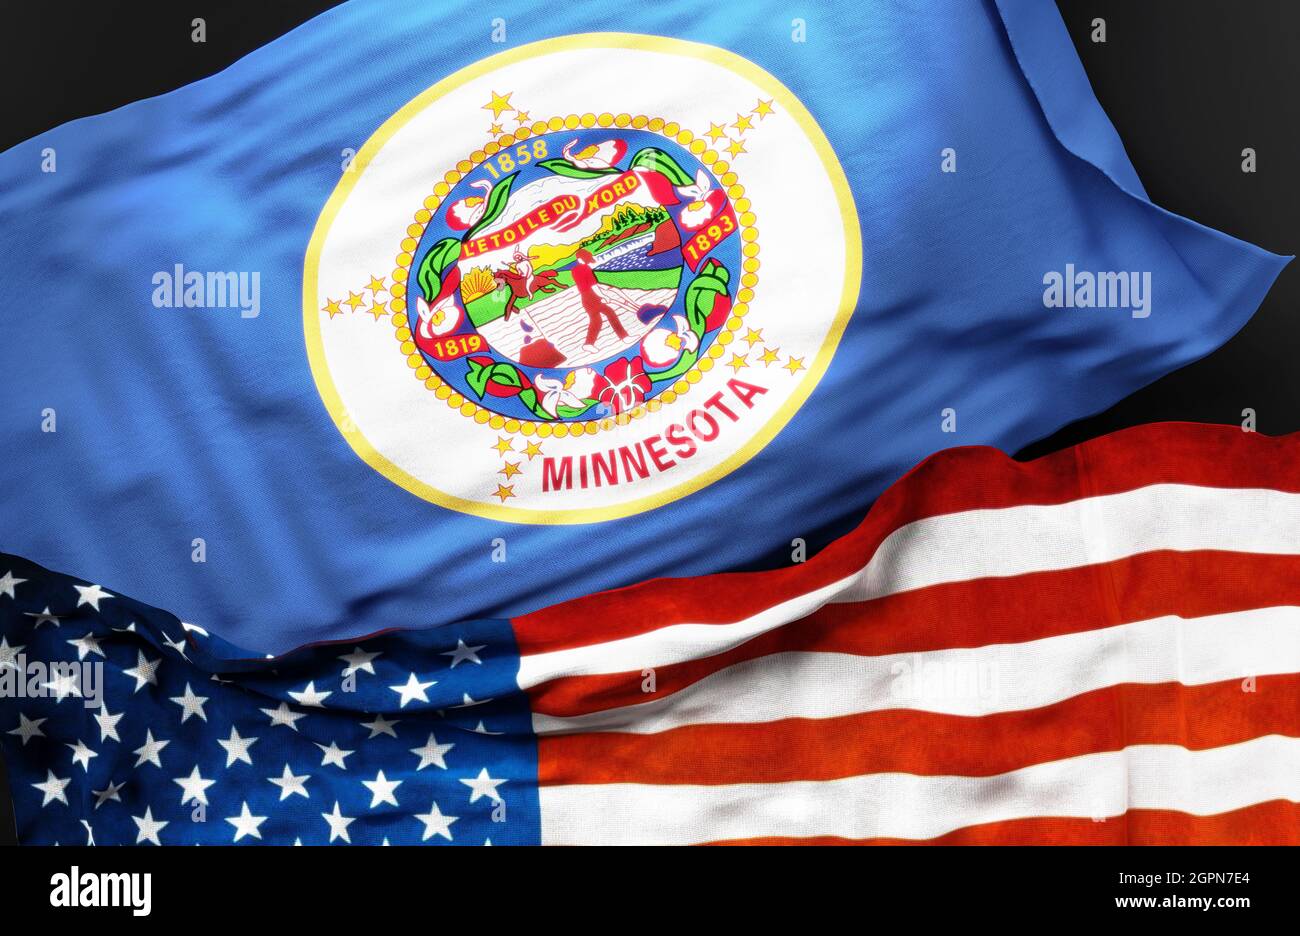 Flag of Minnesota along with a flag of the United States of America as a symbol of unity between them, 3d illustration Stock Photo